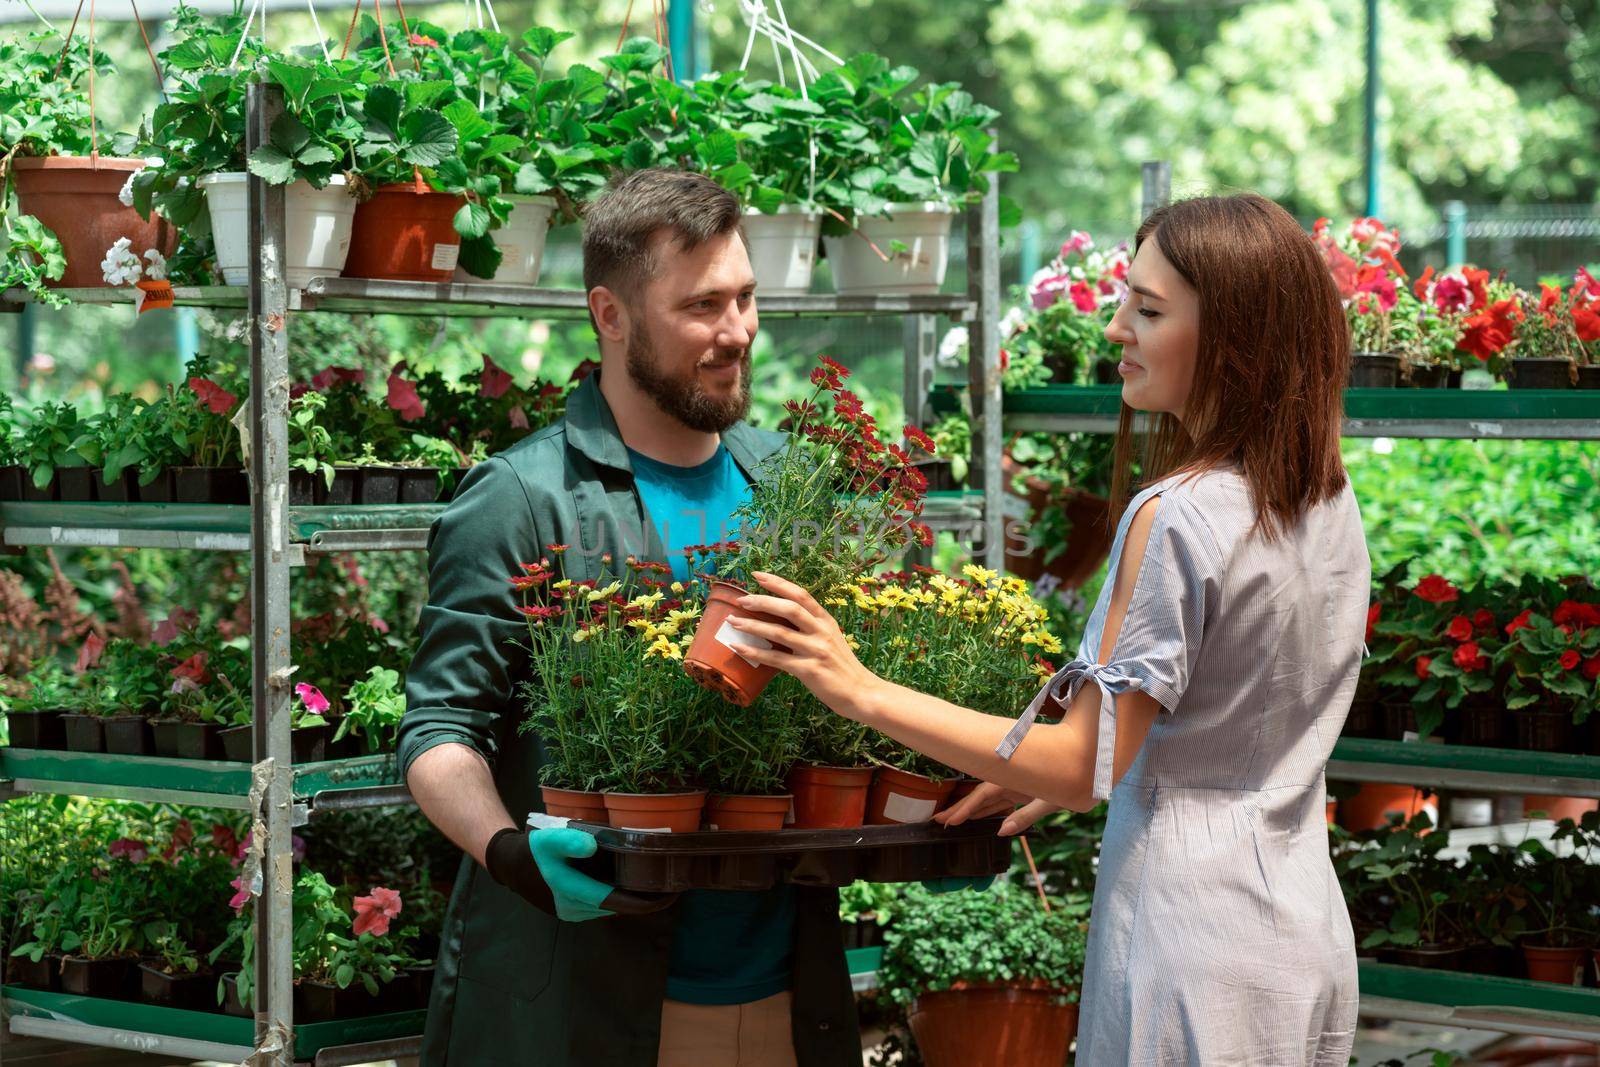 Worker helping female customer to buy flowers in garden center by Mariakray